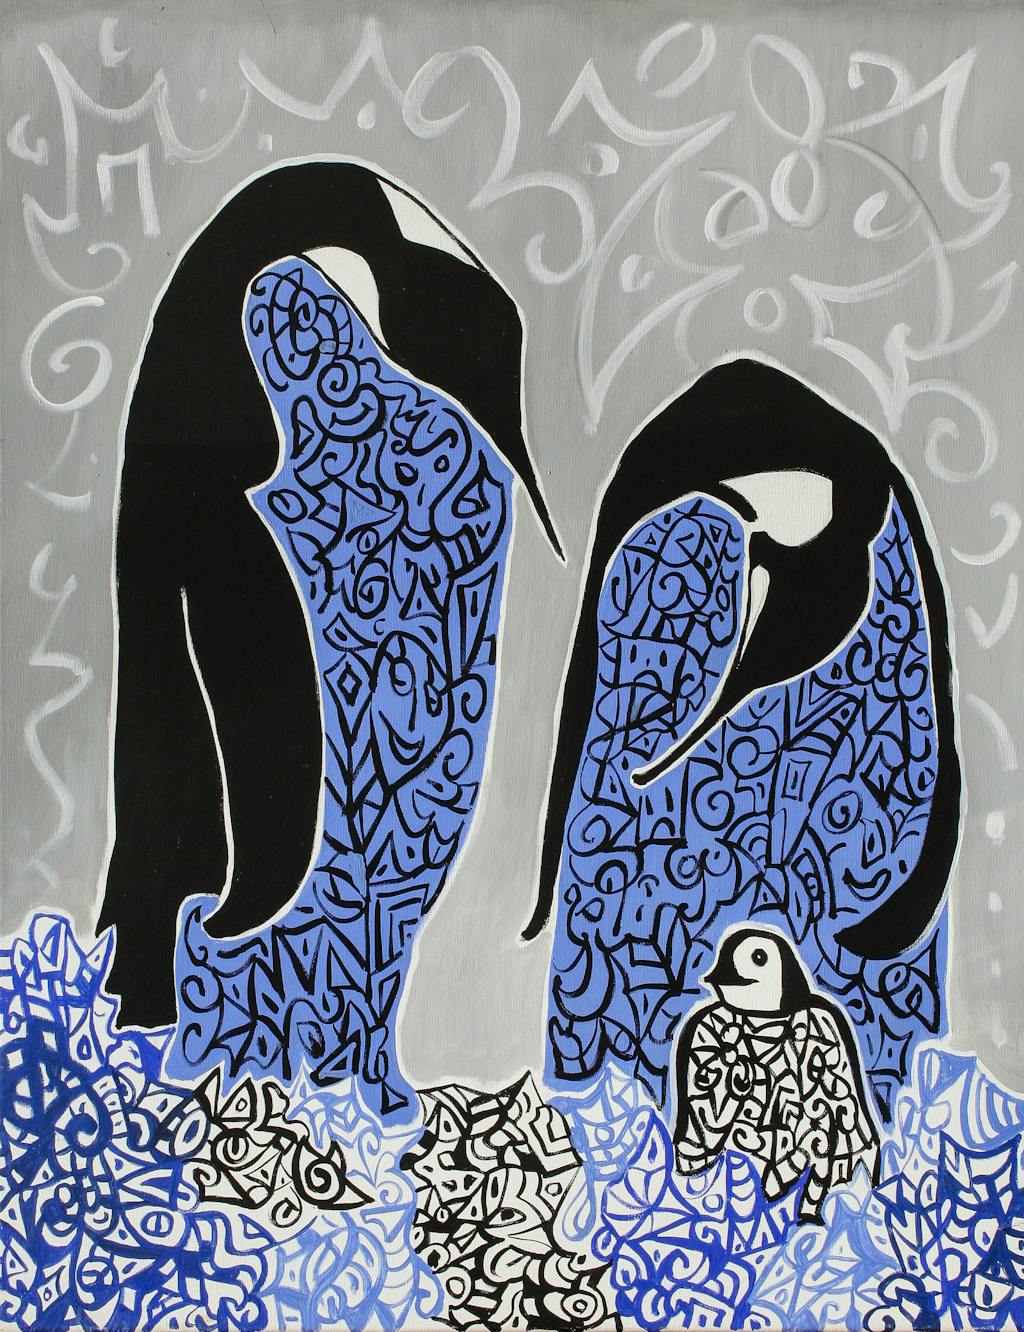 Painting "Family", painted by Elena Birkenwald in 2003